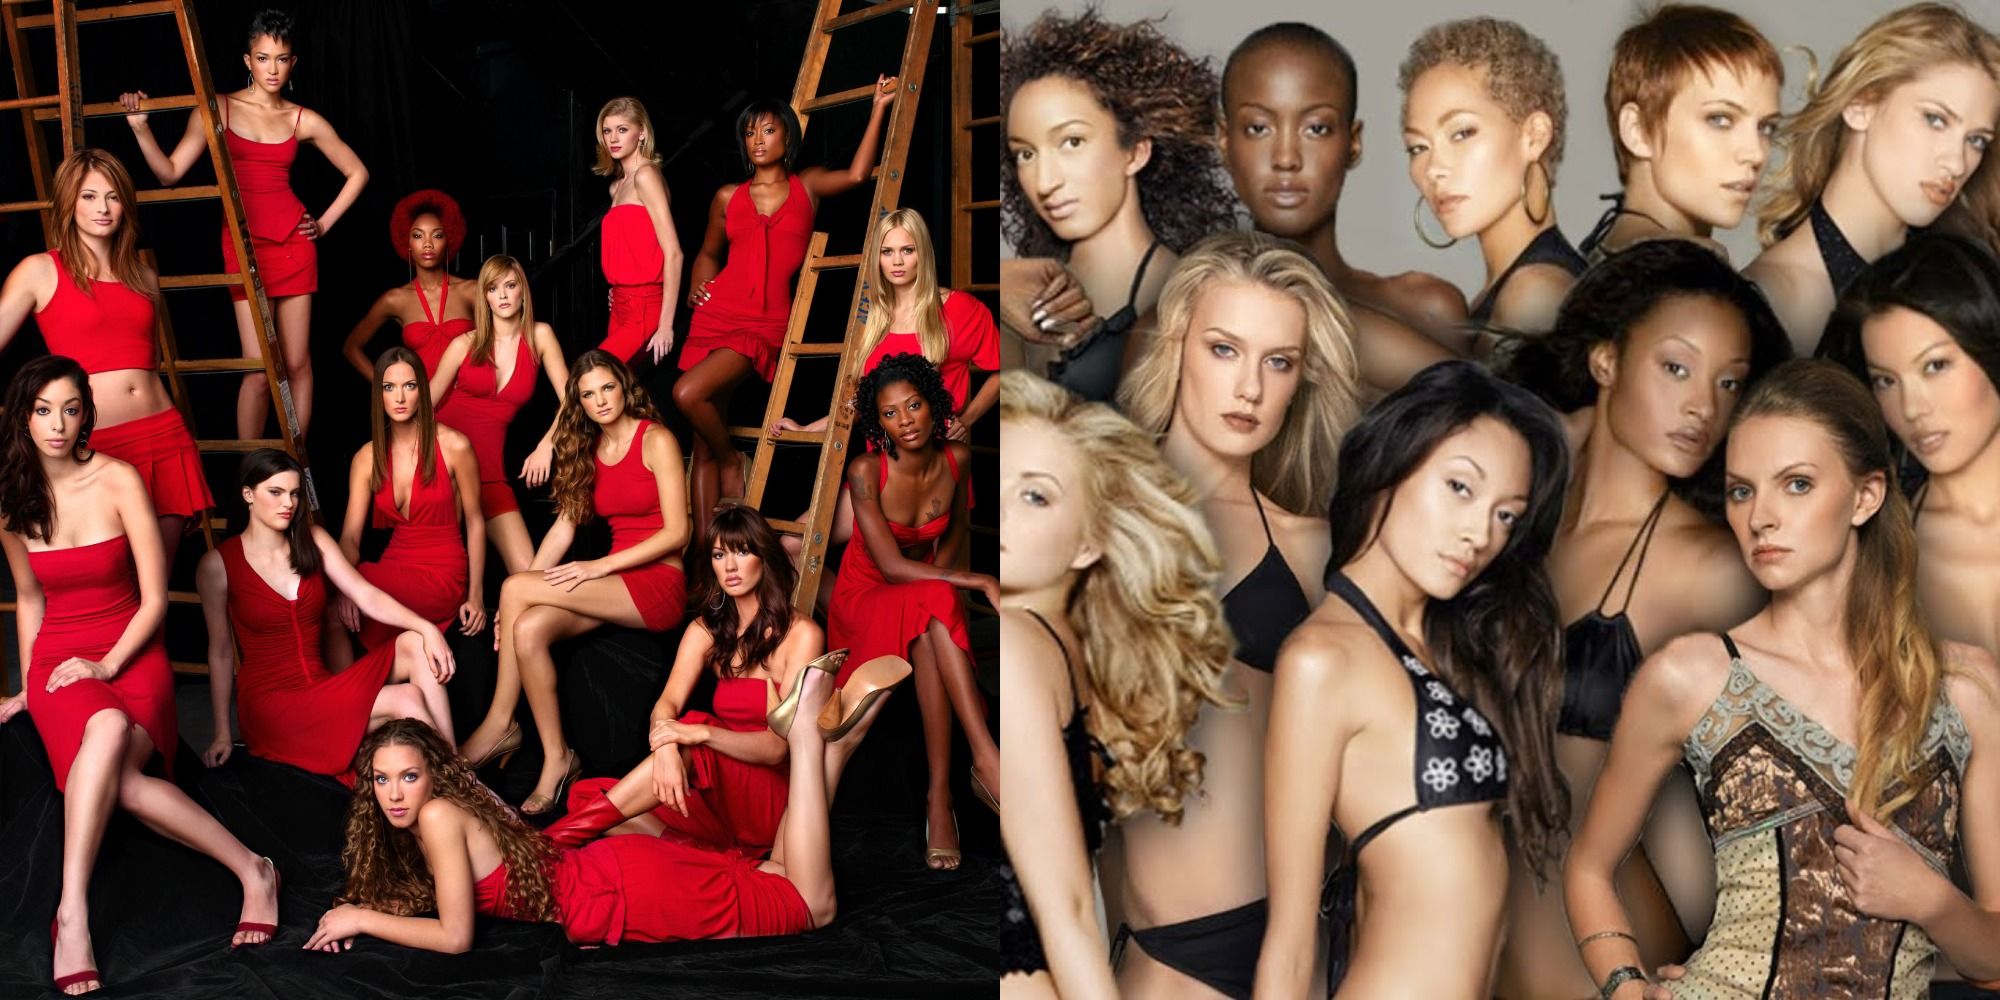 Americas Next Top Model The First 10 Seasons Ranked According To IMDb